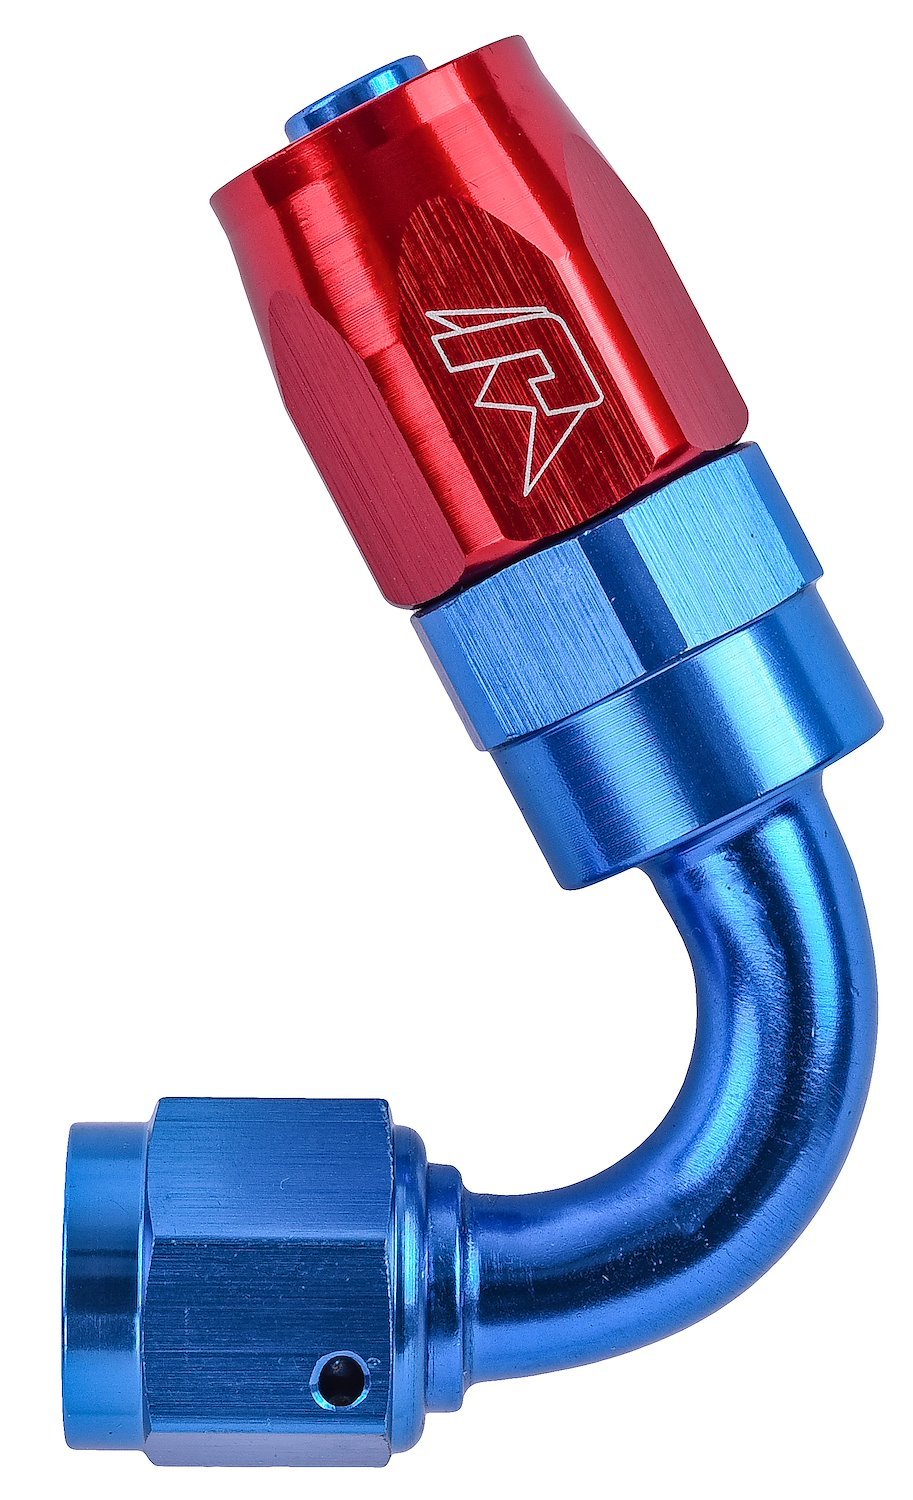 120 degree Max Flow Swivel Hose End -6 AN